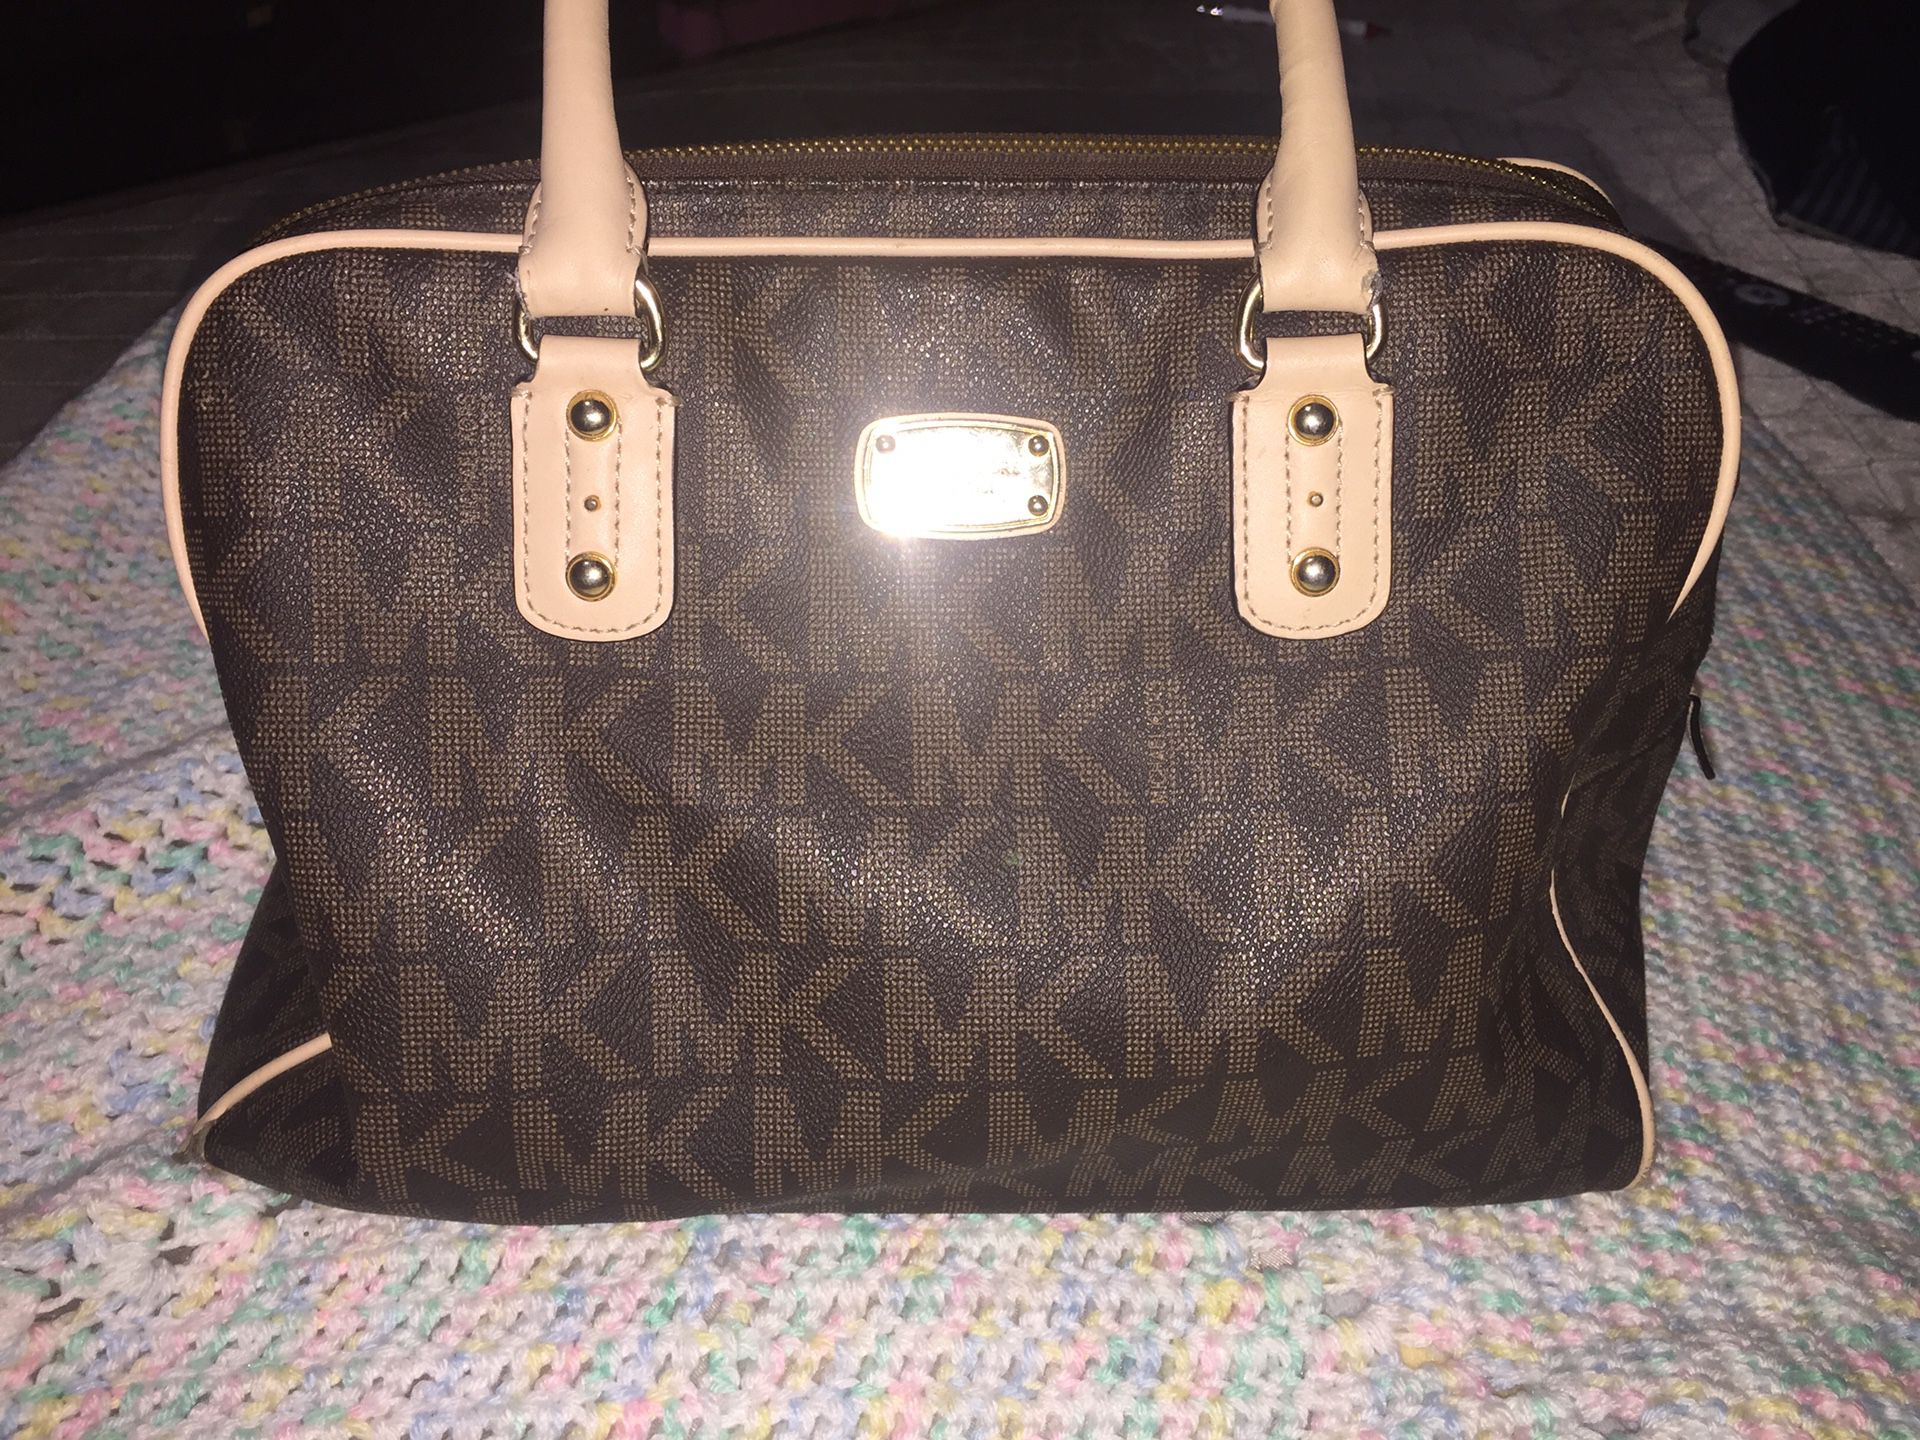 Authentic mk bag taking offers